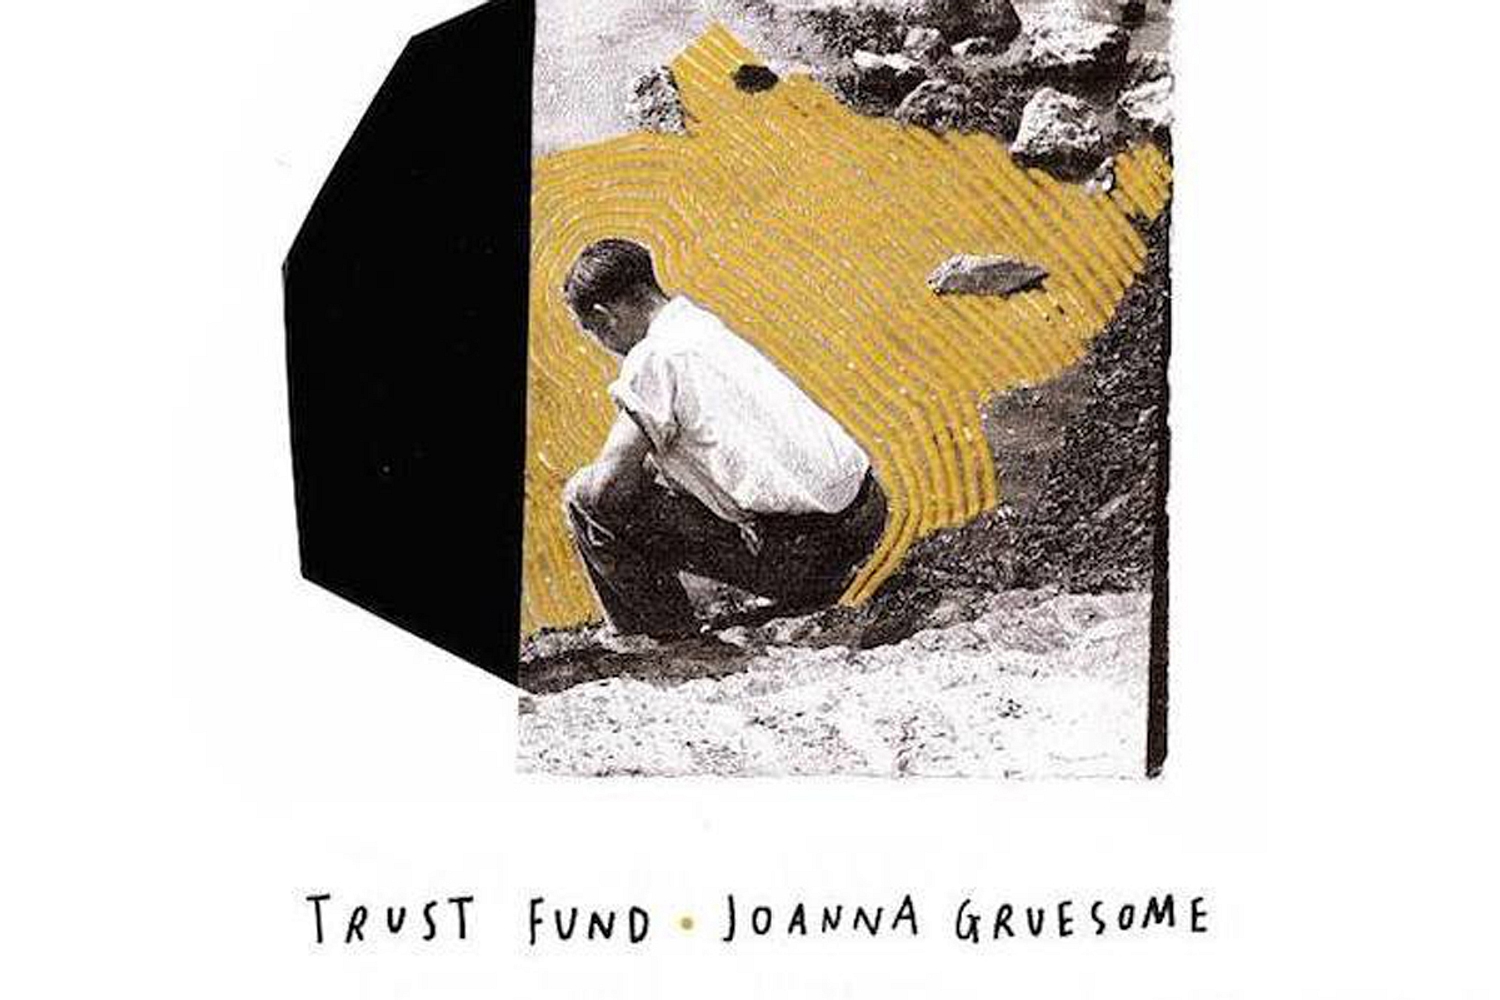 Listen in full to Joanna Gruesome and Trust Fund’s split 12” release